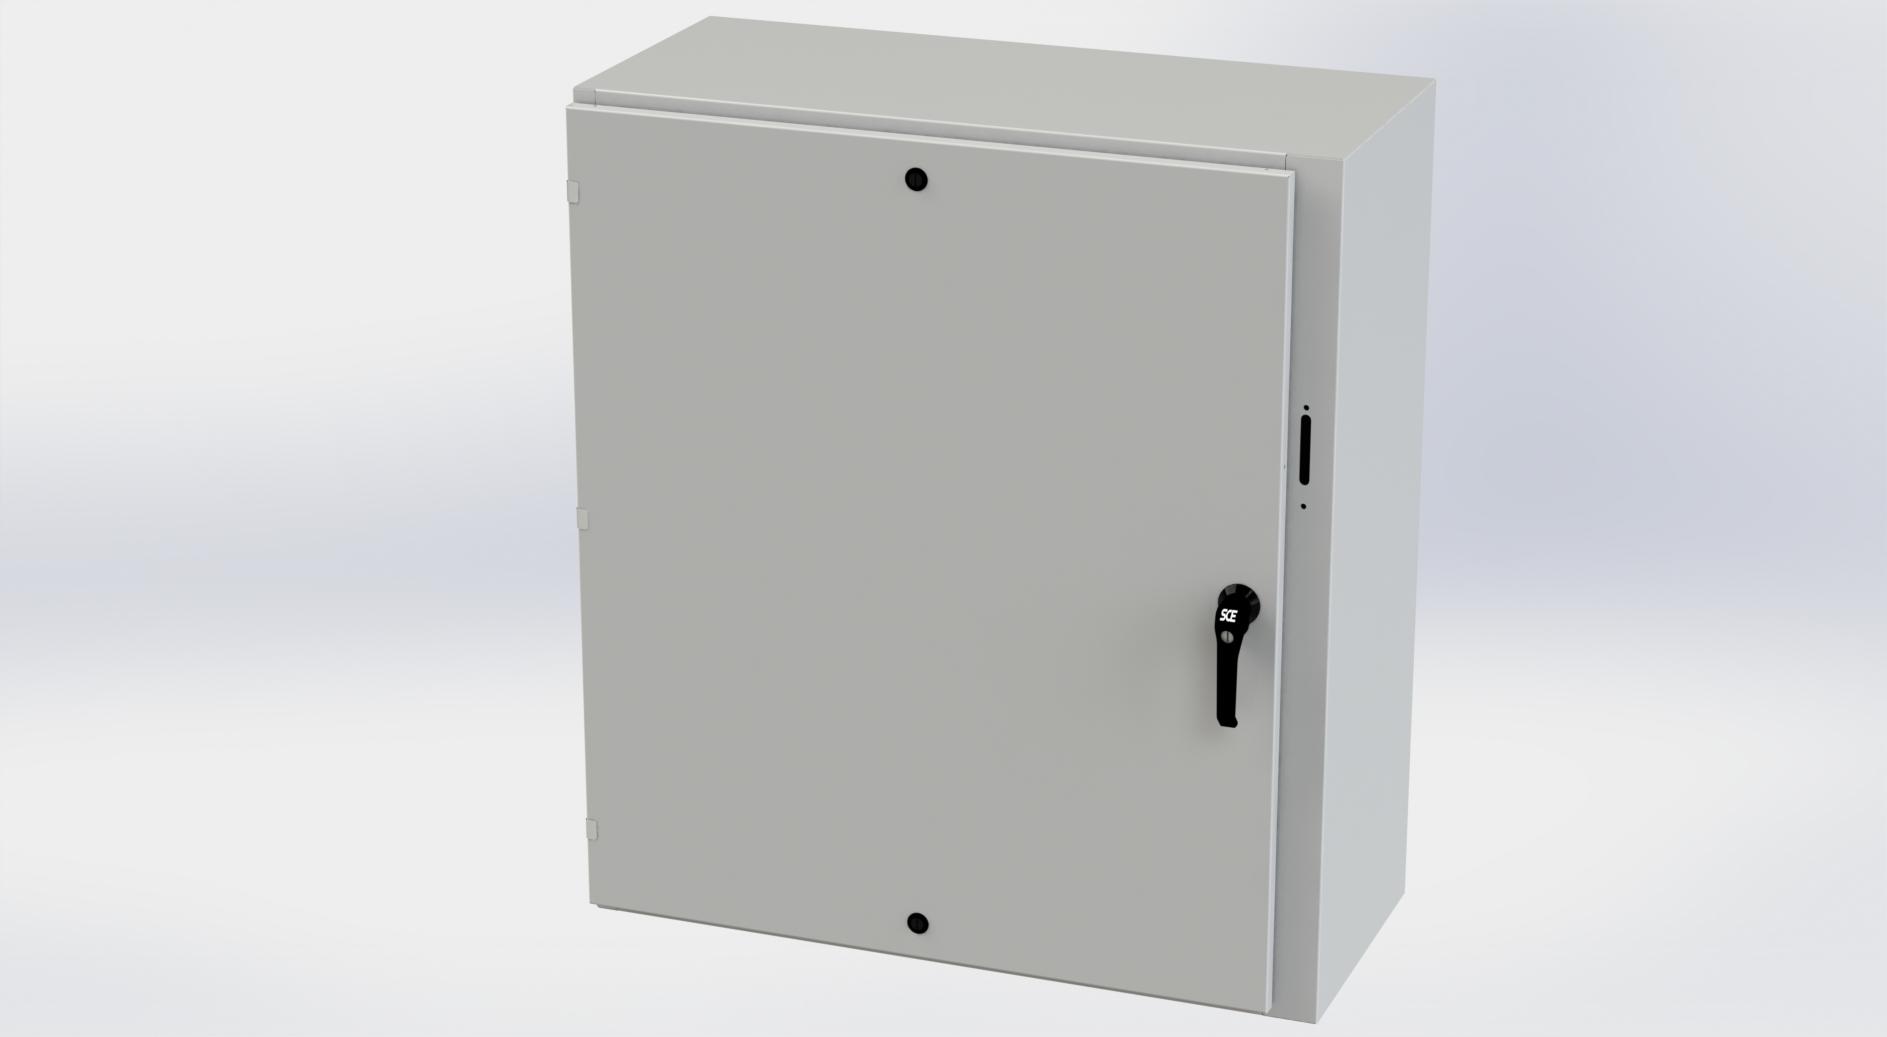 Saginaw Control SCE-42XEL3716LPLG XEL LP Enclosure, Height:42.00", Width:37.38", Depth:16.00", RAL 7035 gray powder coating inside and out. Optional sub-panels are powder coated white.